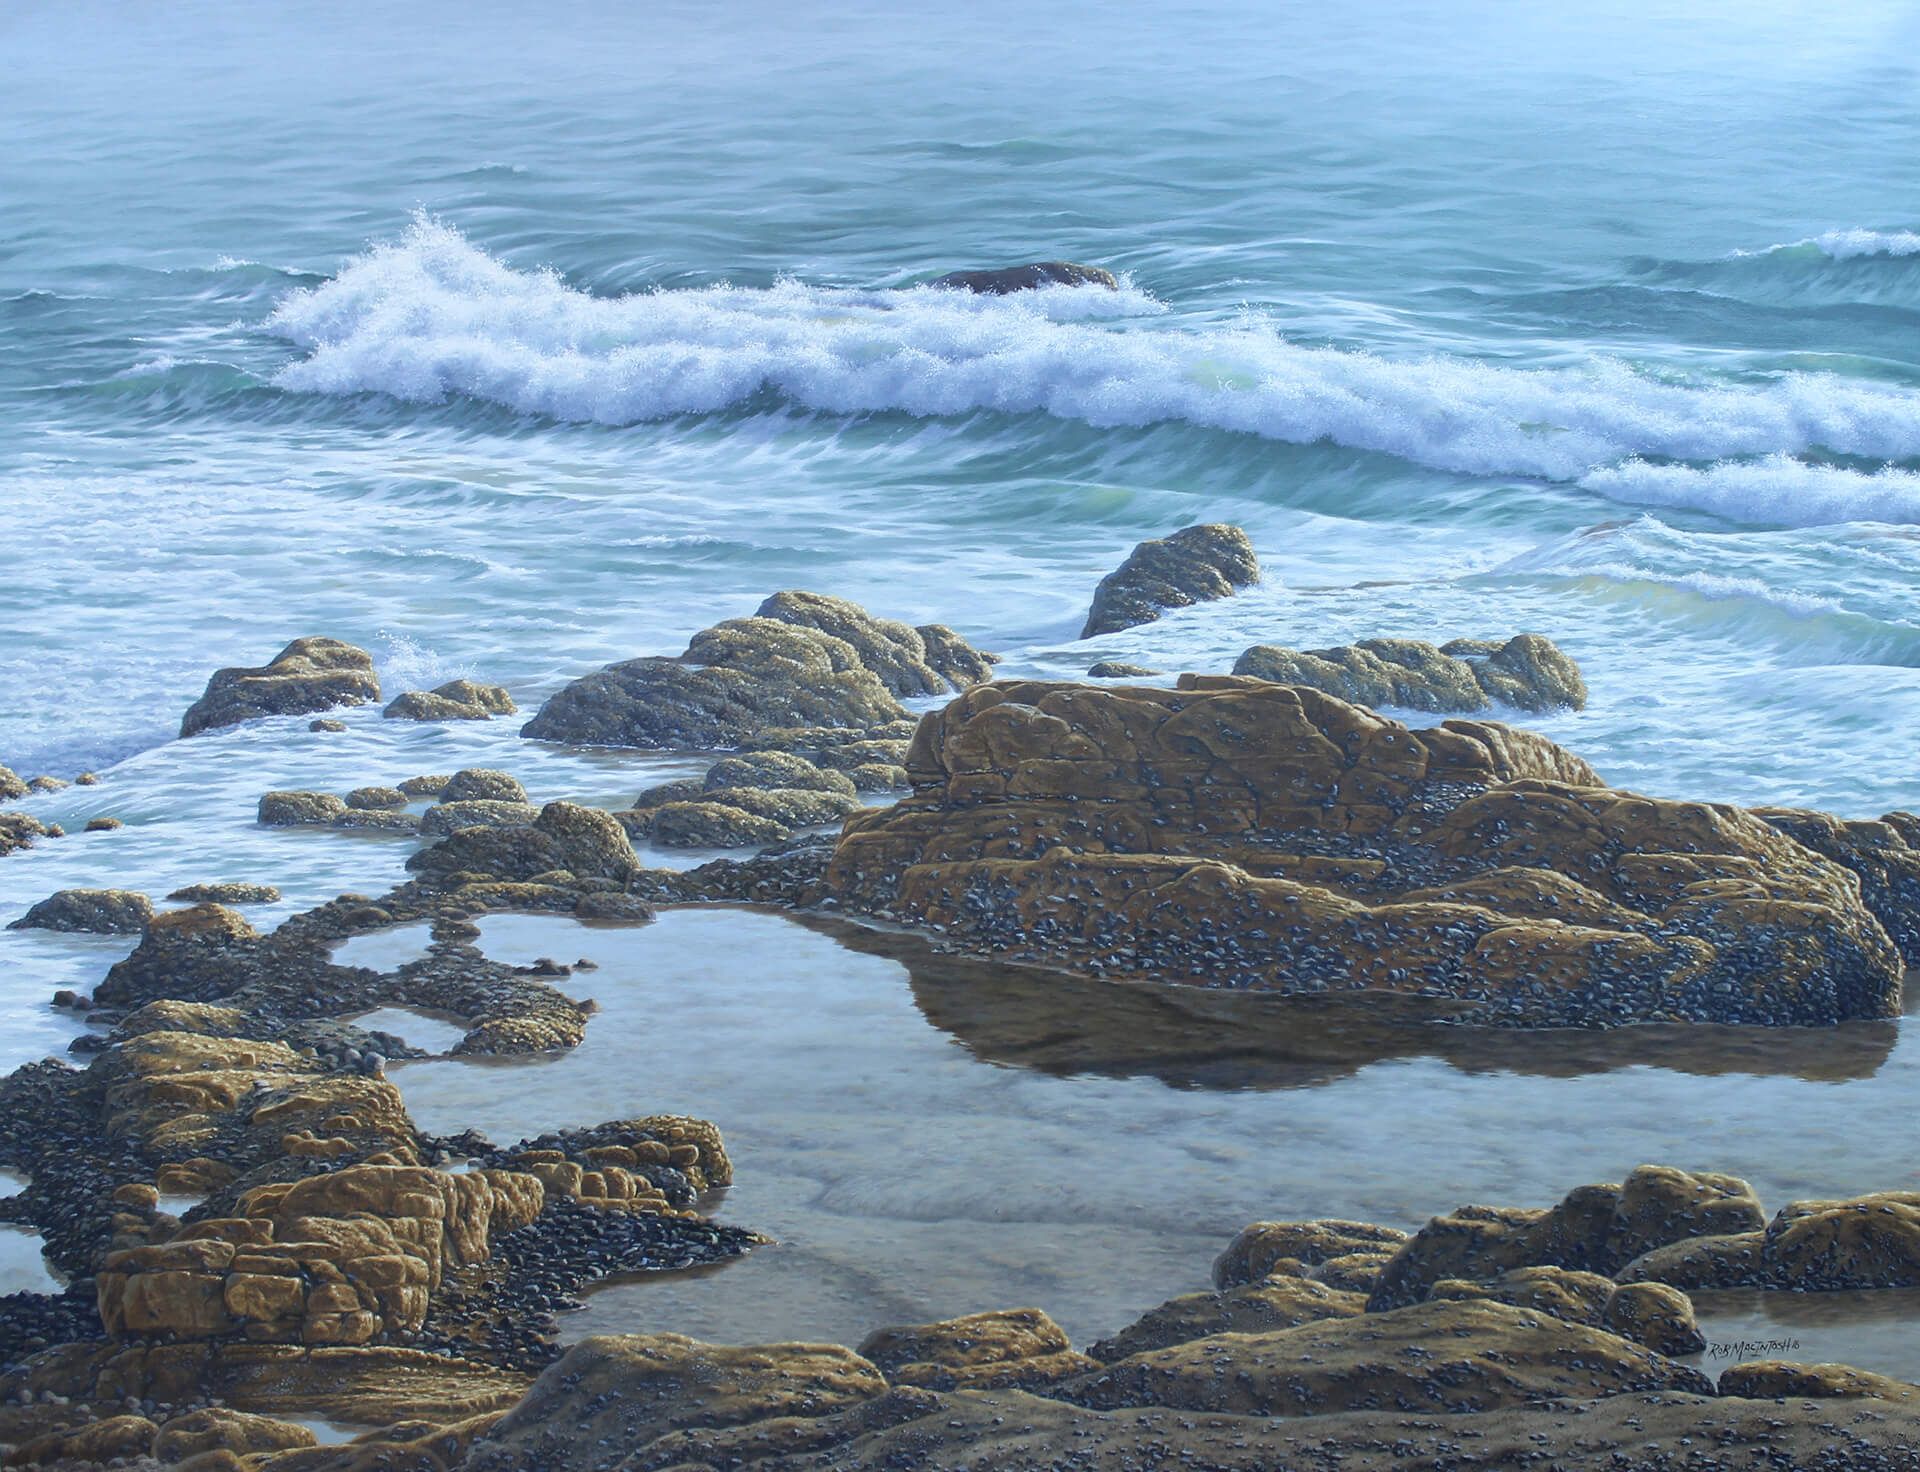 Photorealistic painting of reflections of a tide pool